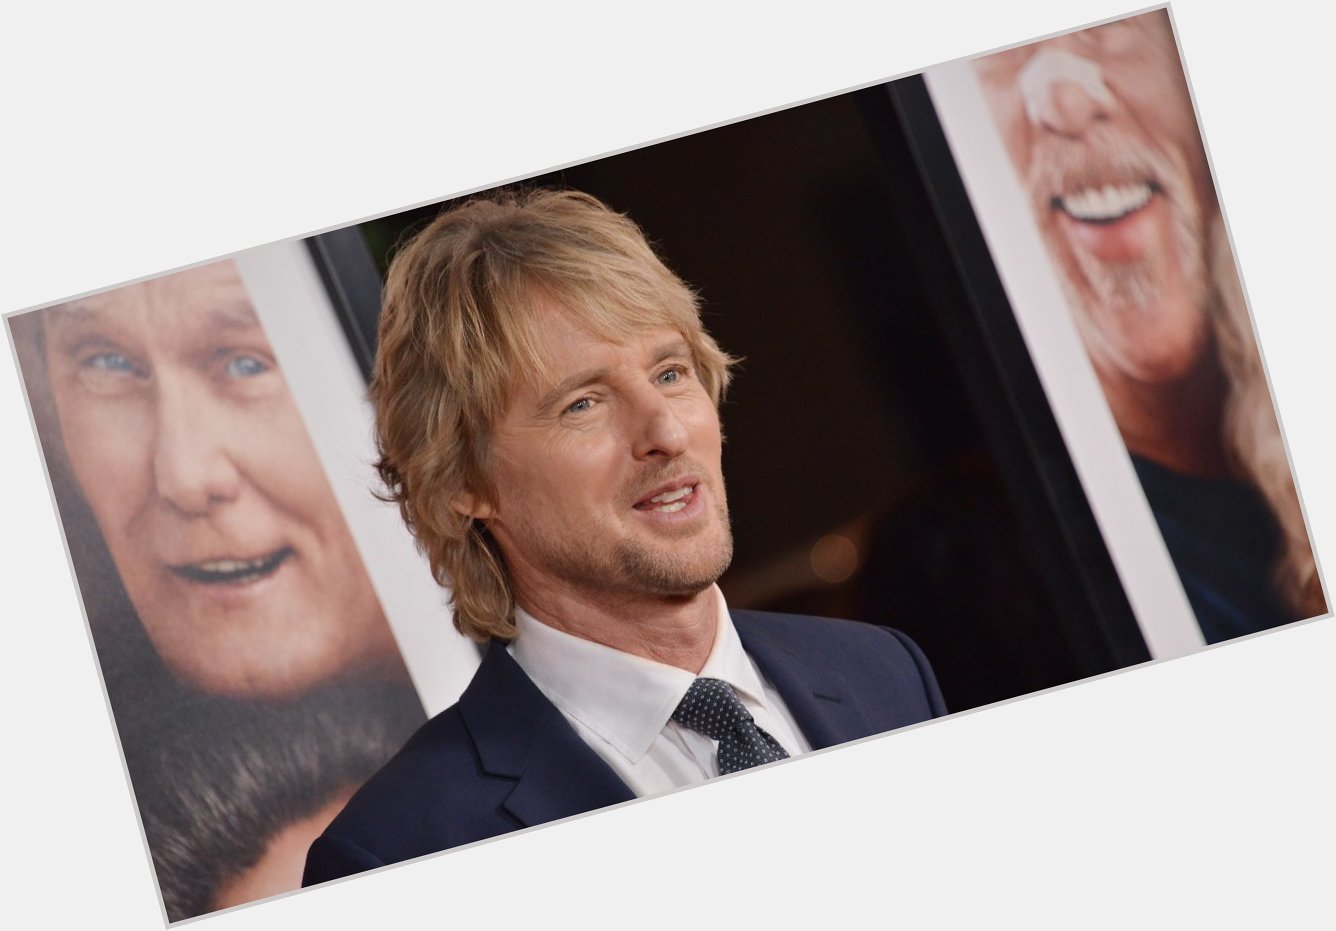 Happy birthday to Owen Wilson!

Say Wow in the comments 